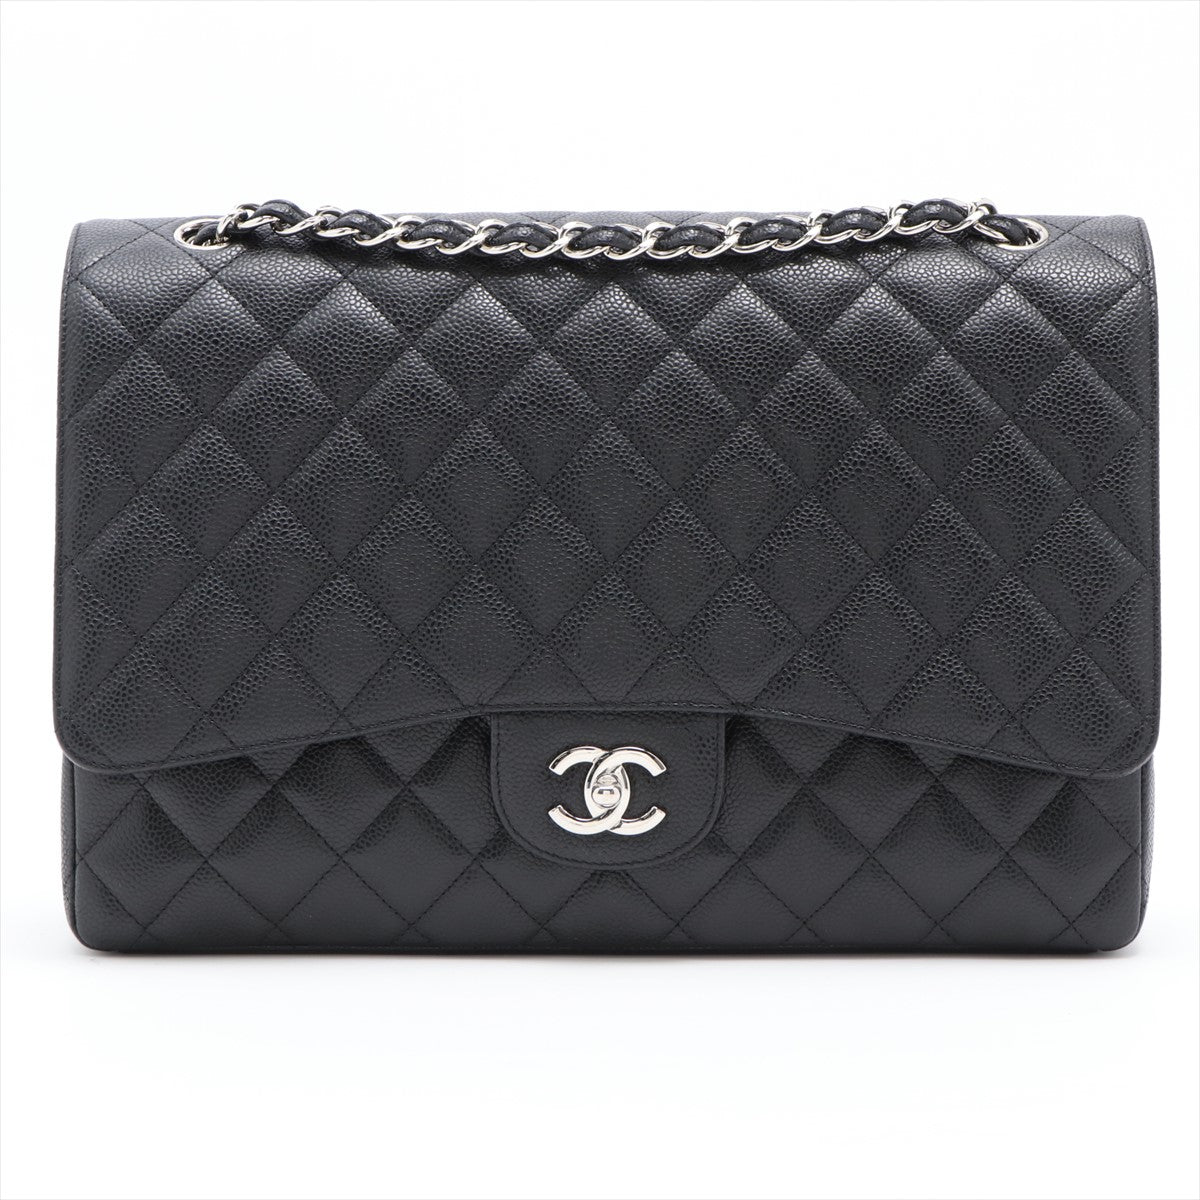 Pre-Owned Chanel Limited Edition Small Calfskin Perfect Fit Flap Bag